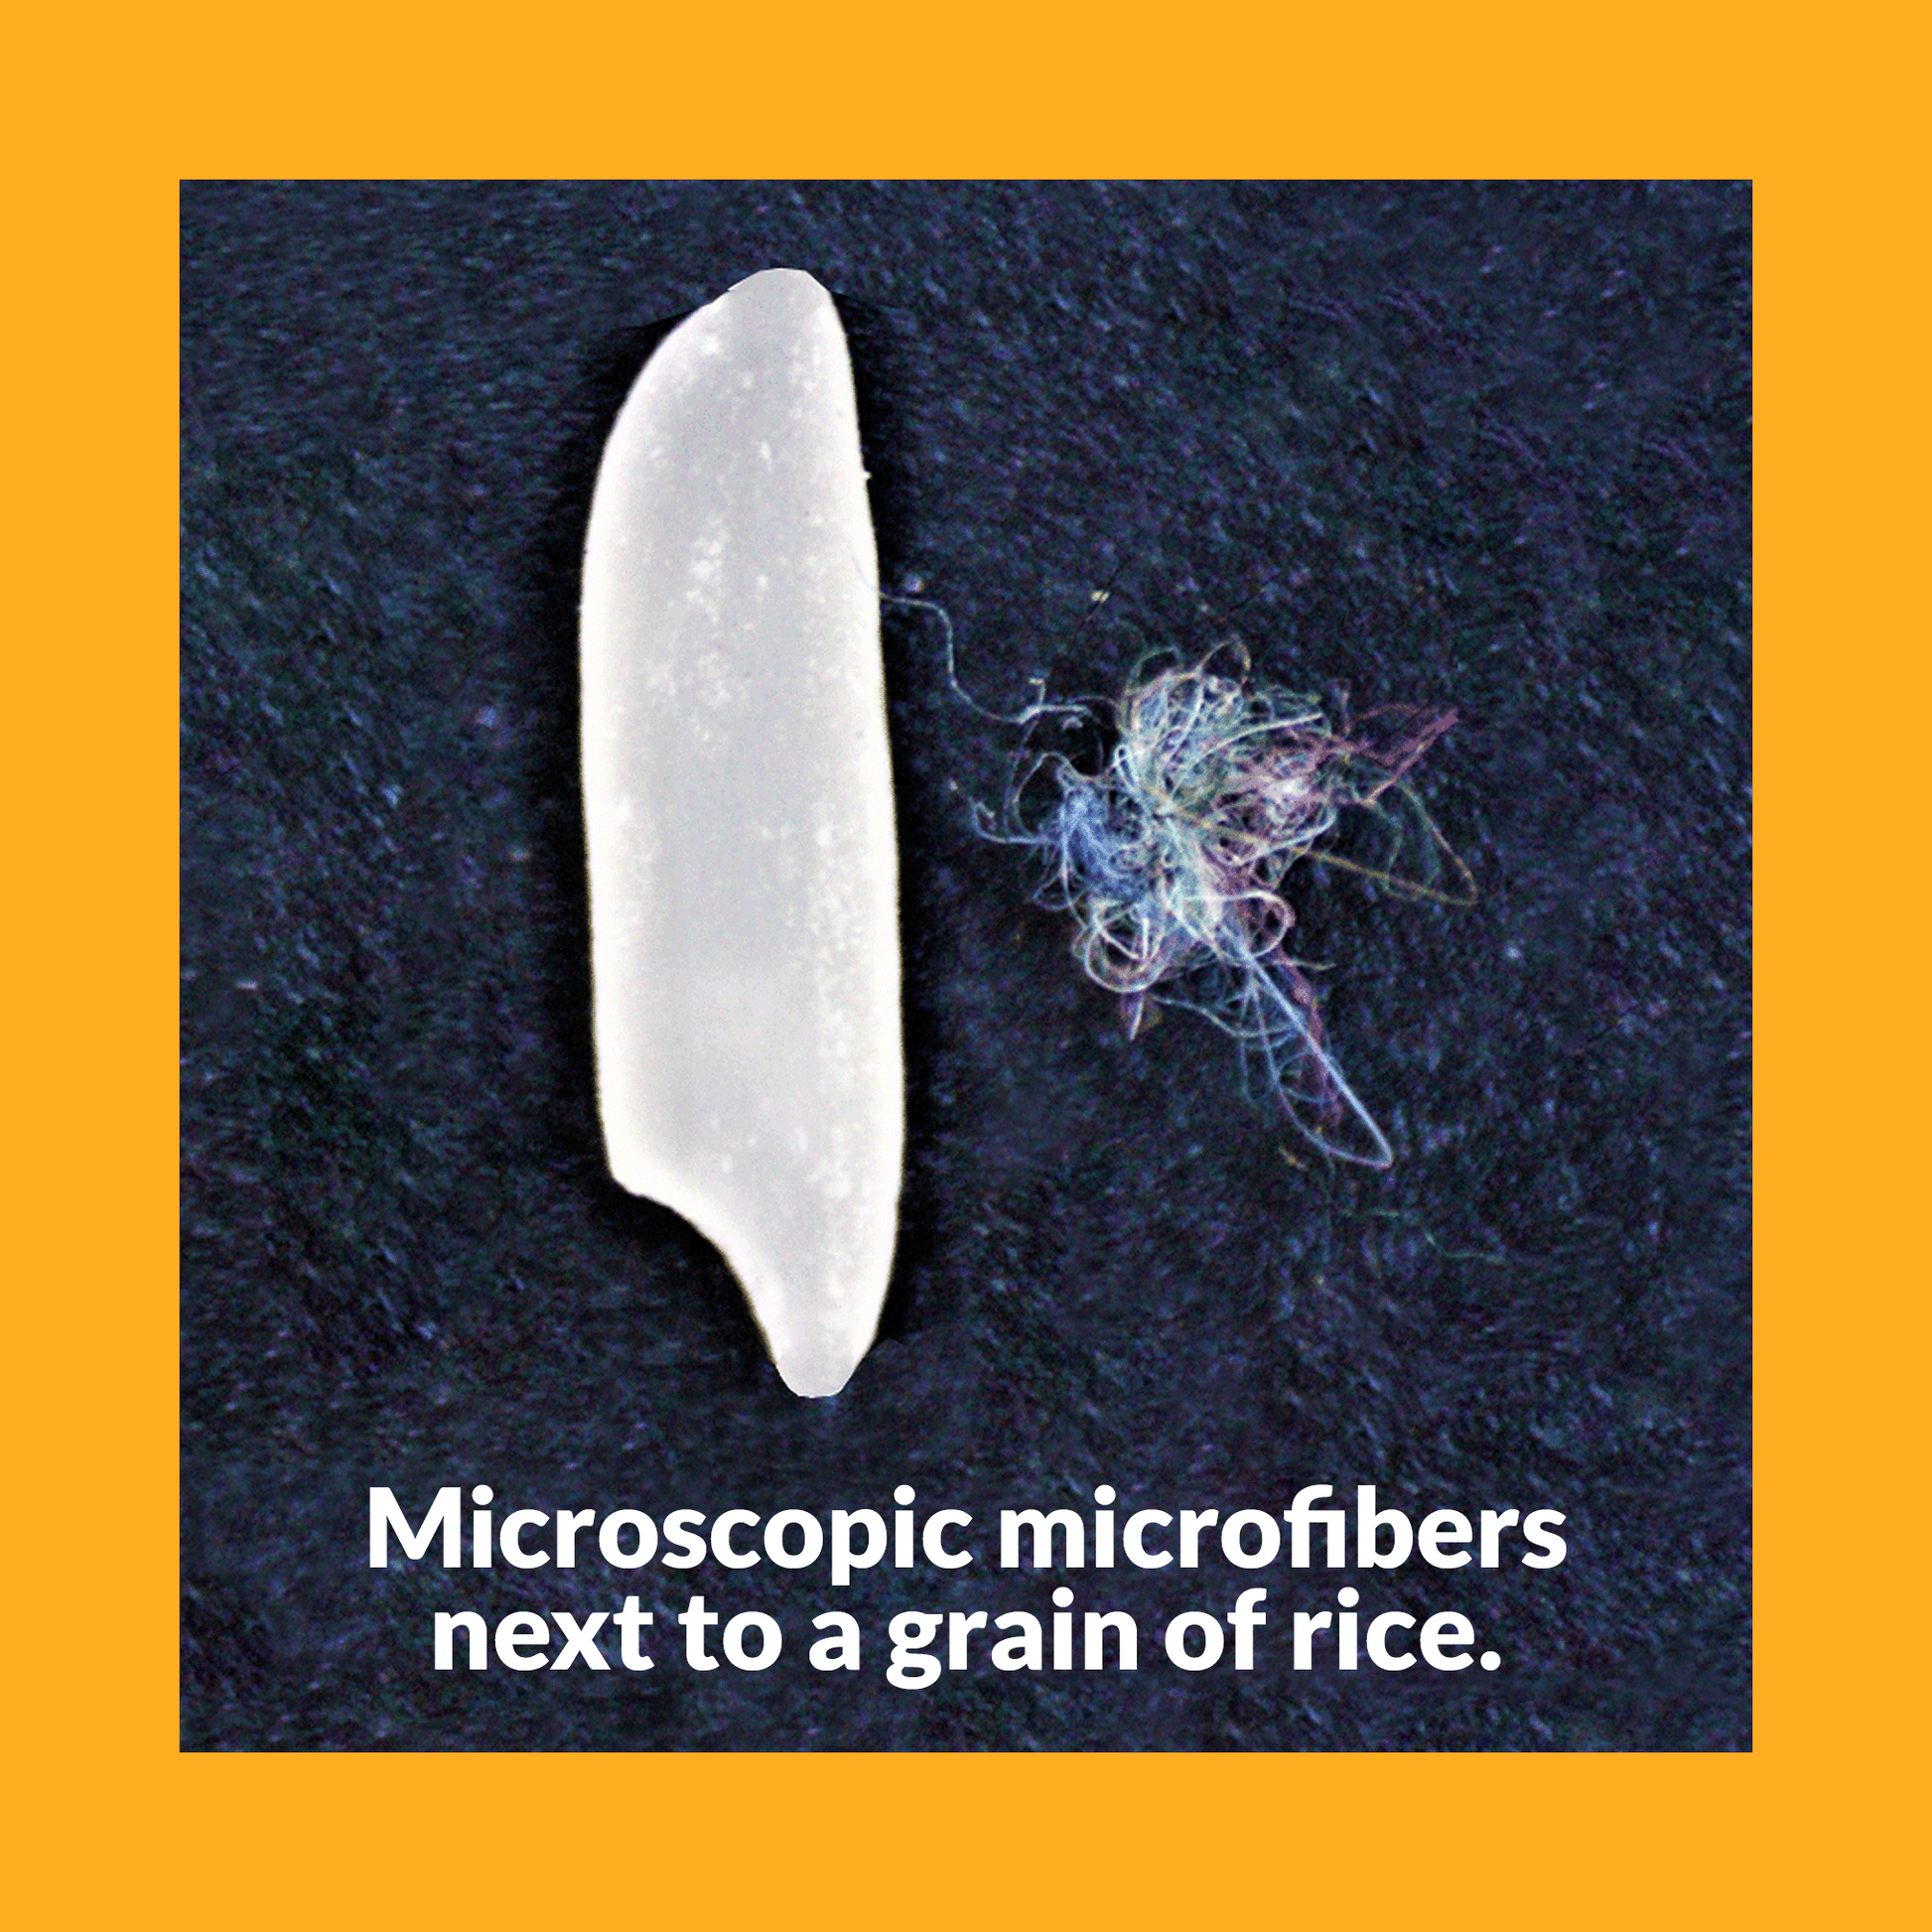 A microscopic ball of microfibers next to a grain of rice